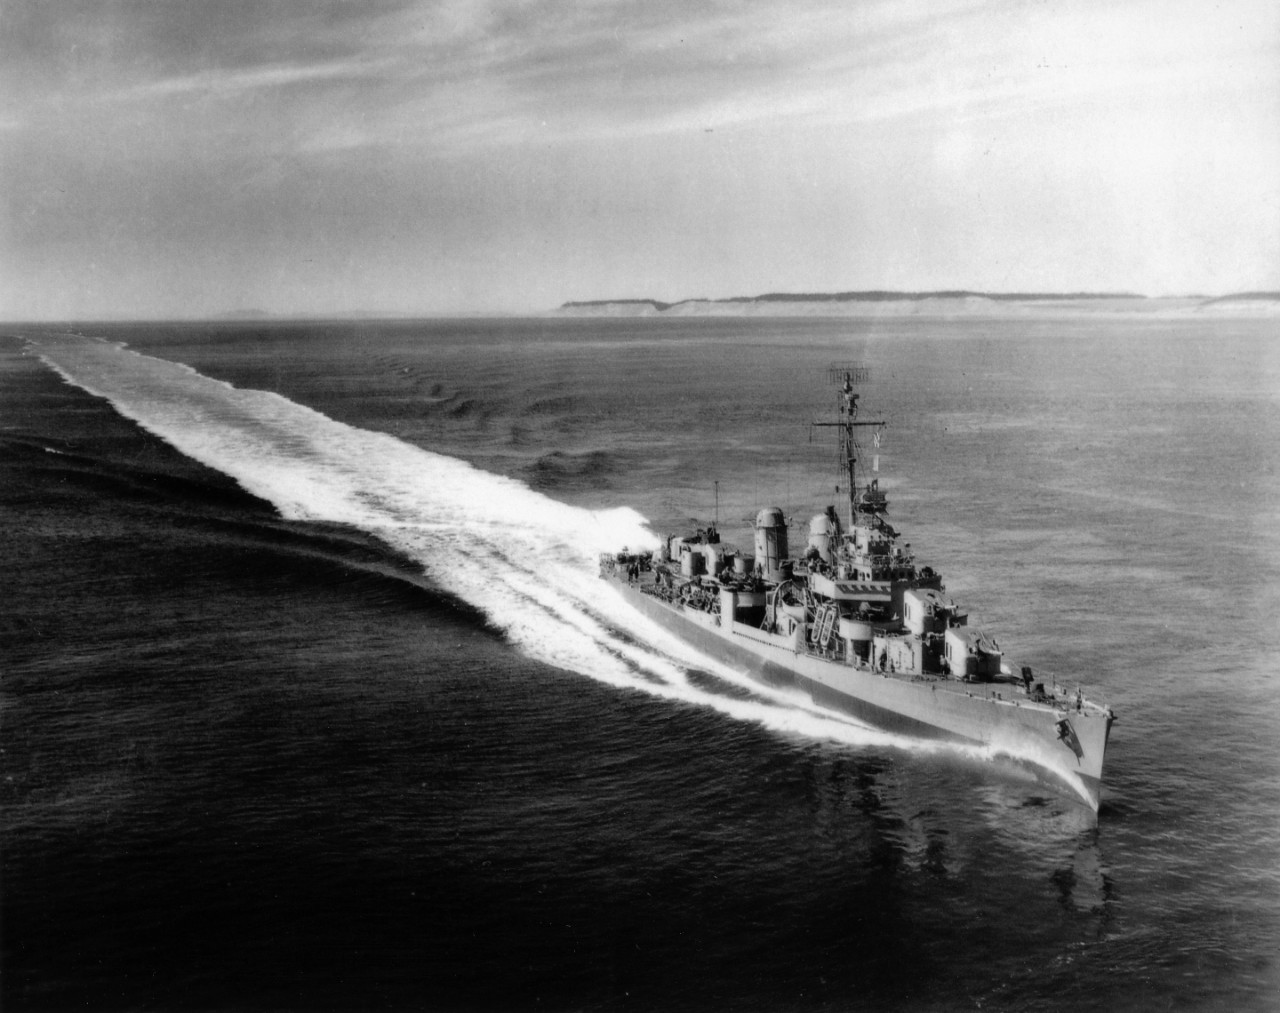 USS Izard (DD-589) underway at high speed. Since no national ensign appears to be flying, photo may have been taken during builder's trials prior to commissioning. 